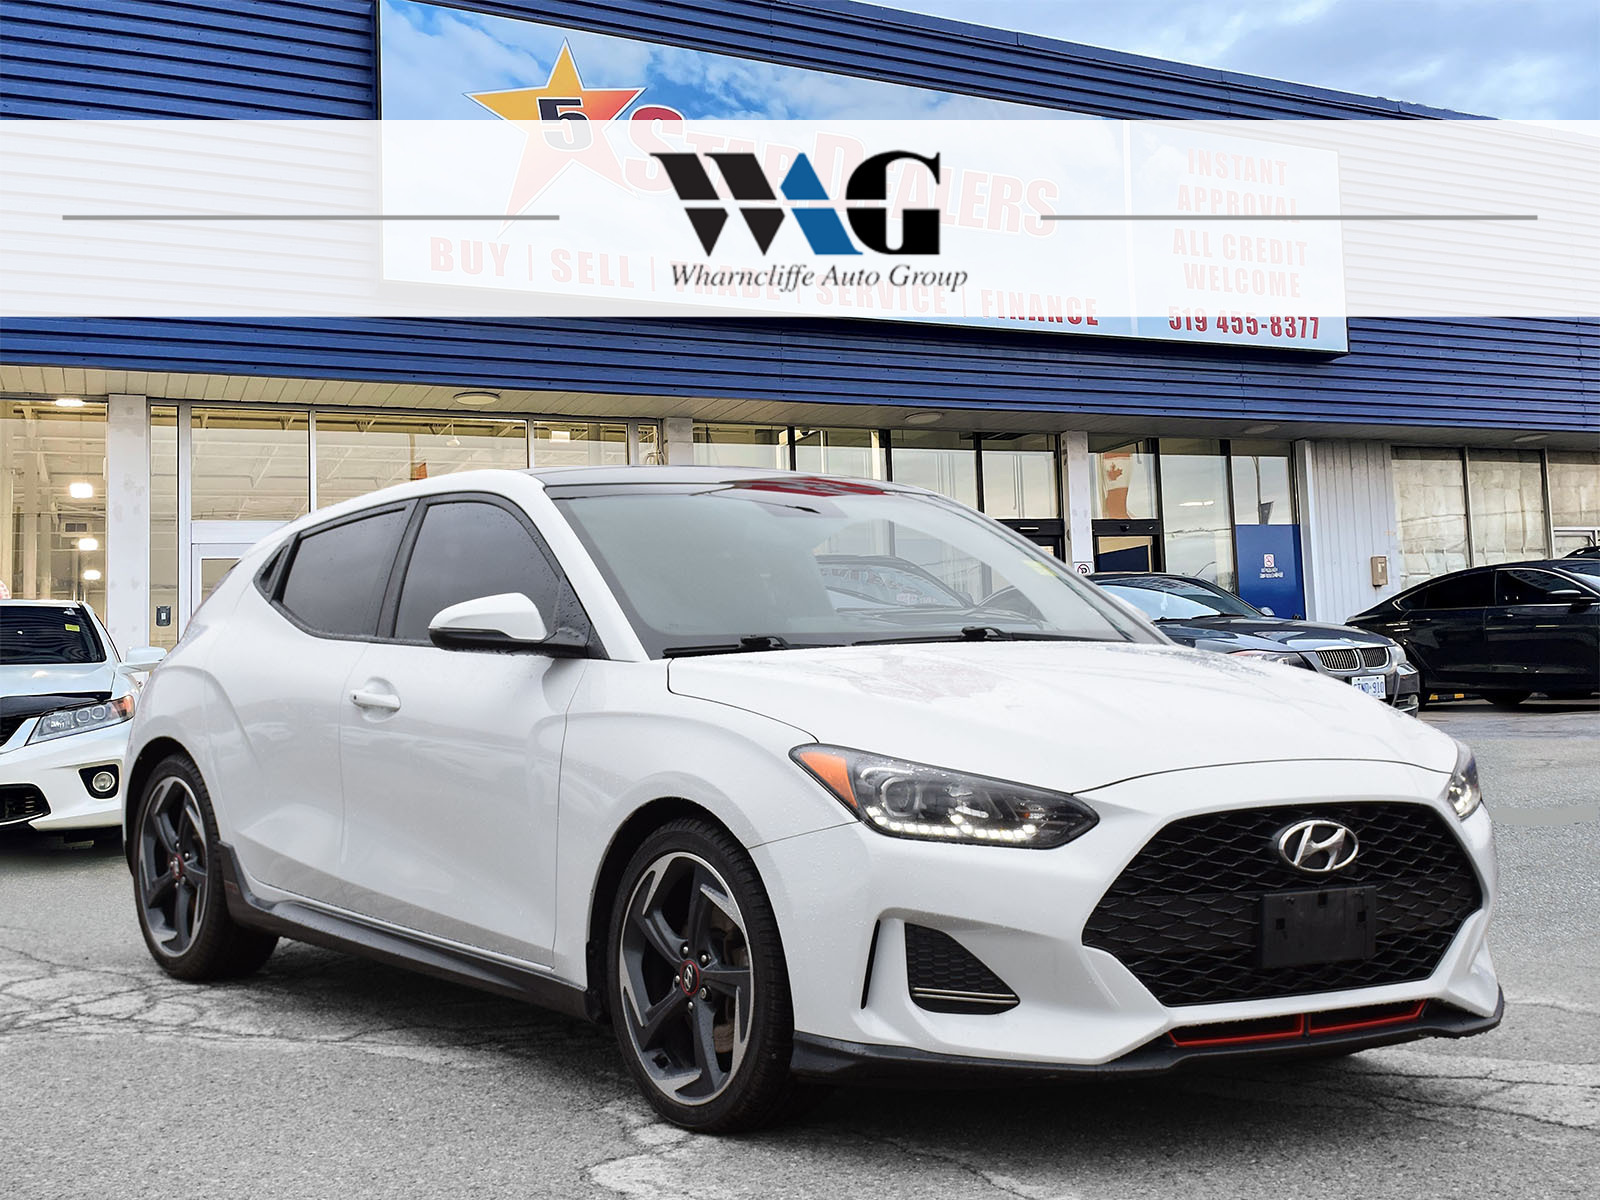 2020 Hyundai Veloster NAV LEATHER SUNROOF LOADED! WE FINANCE ALL CREDIT